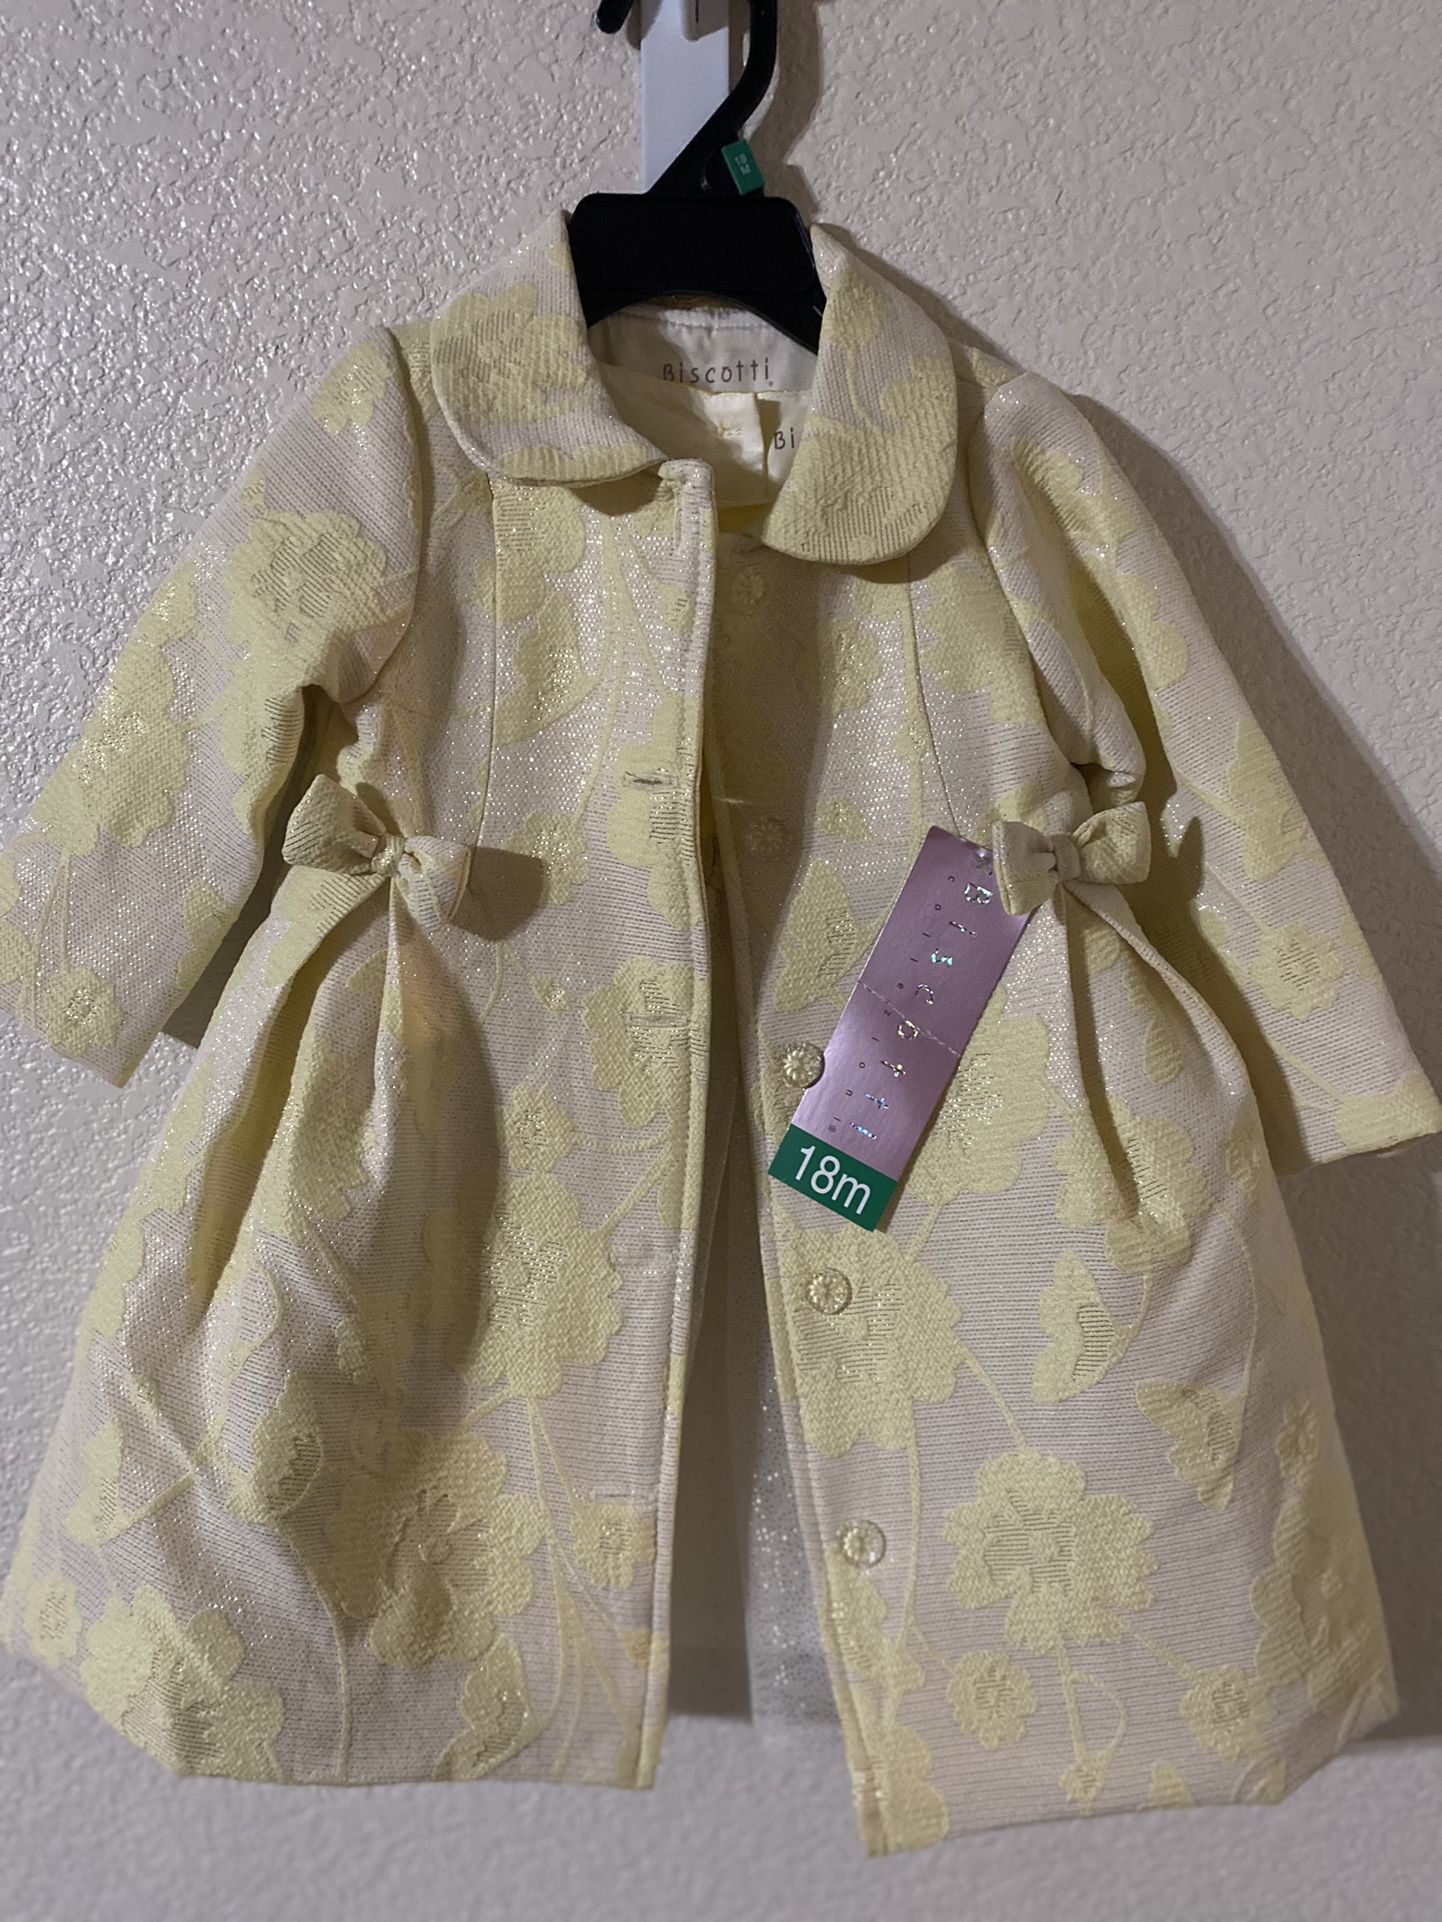 New With Tags  18mo Toddler Dress 